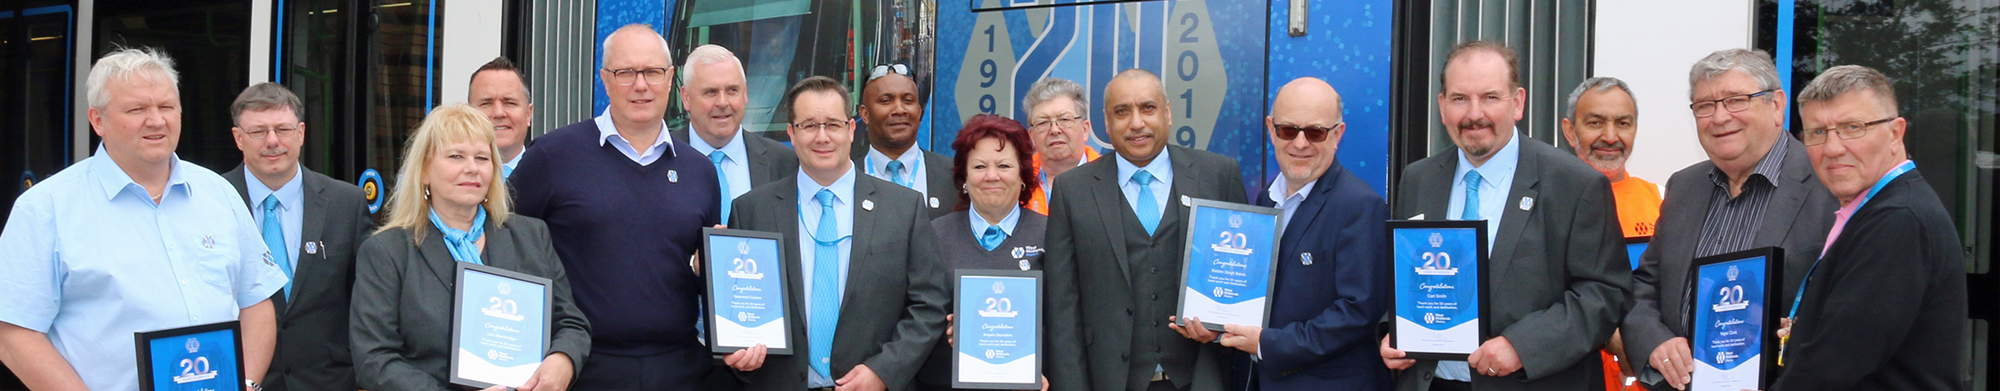 Group of people in West Midlands Metro uniform holding certificates